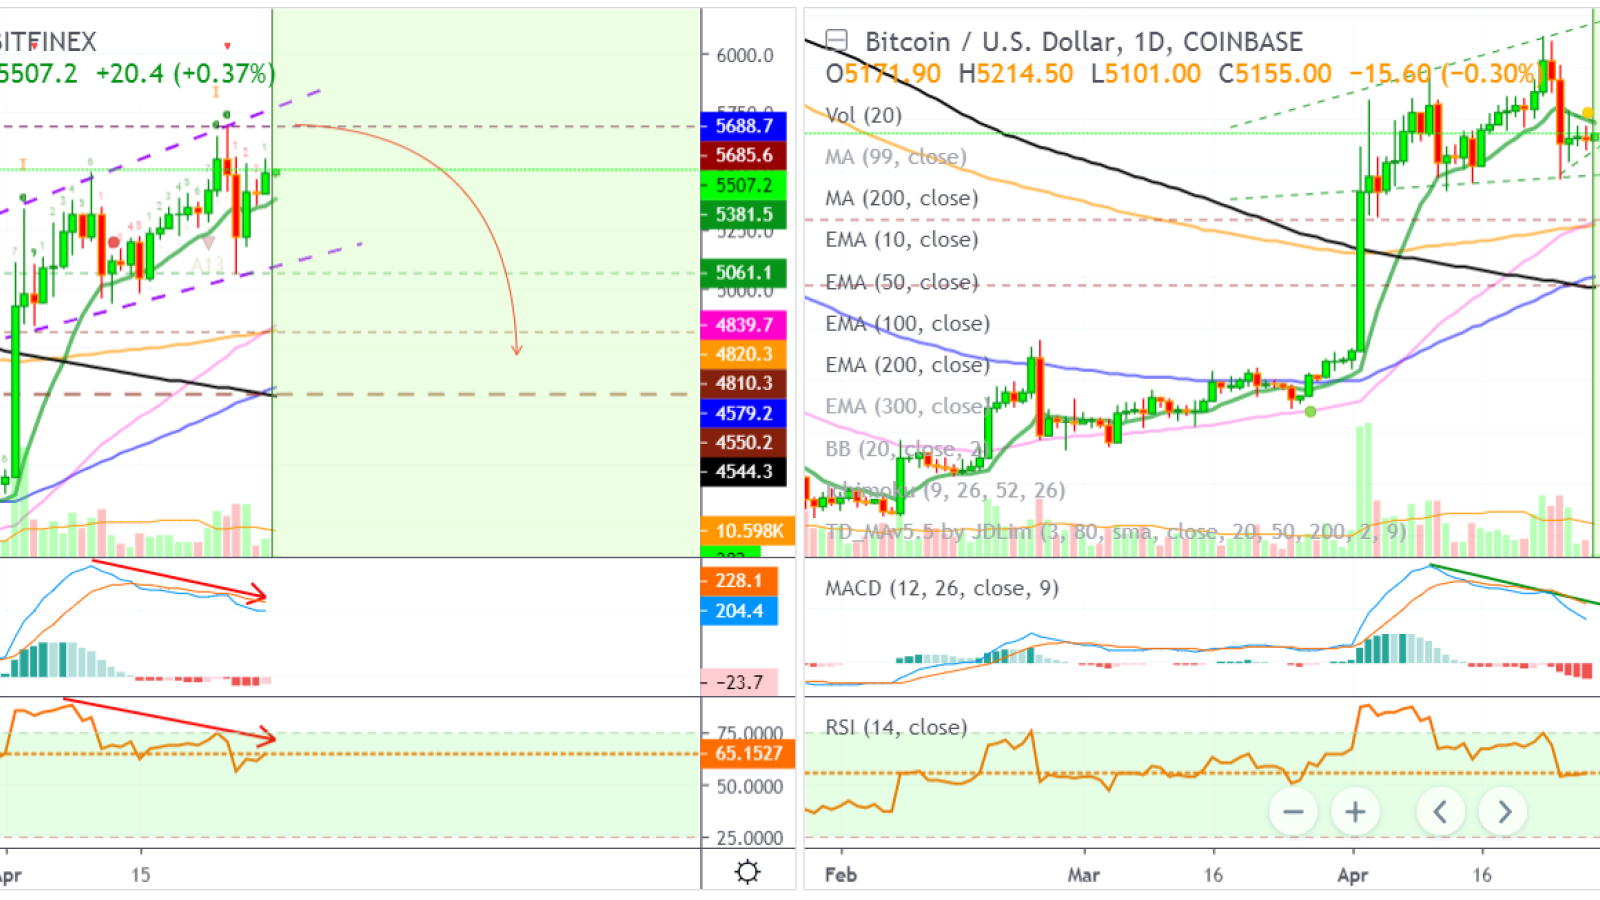  BTC support will be found in $4,900 - $5,000